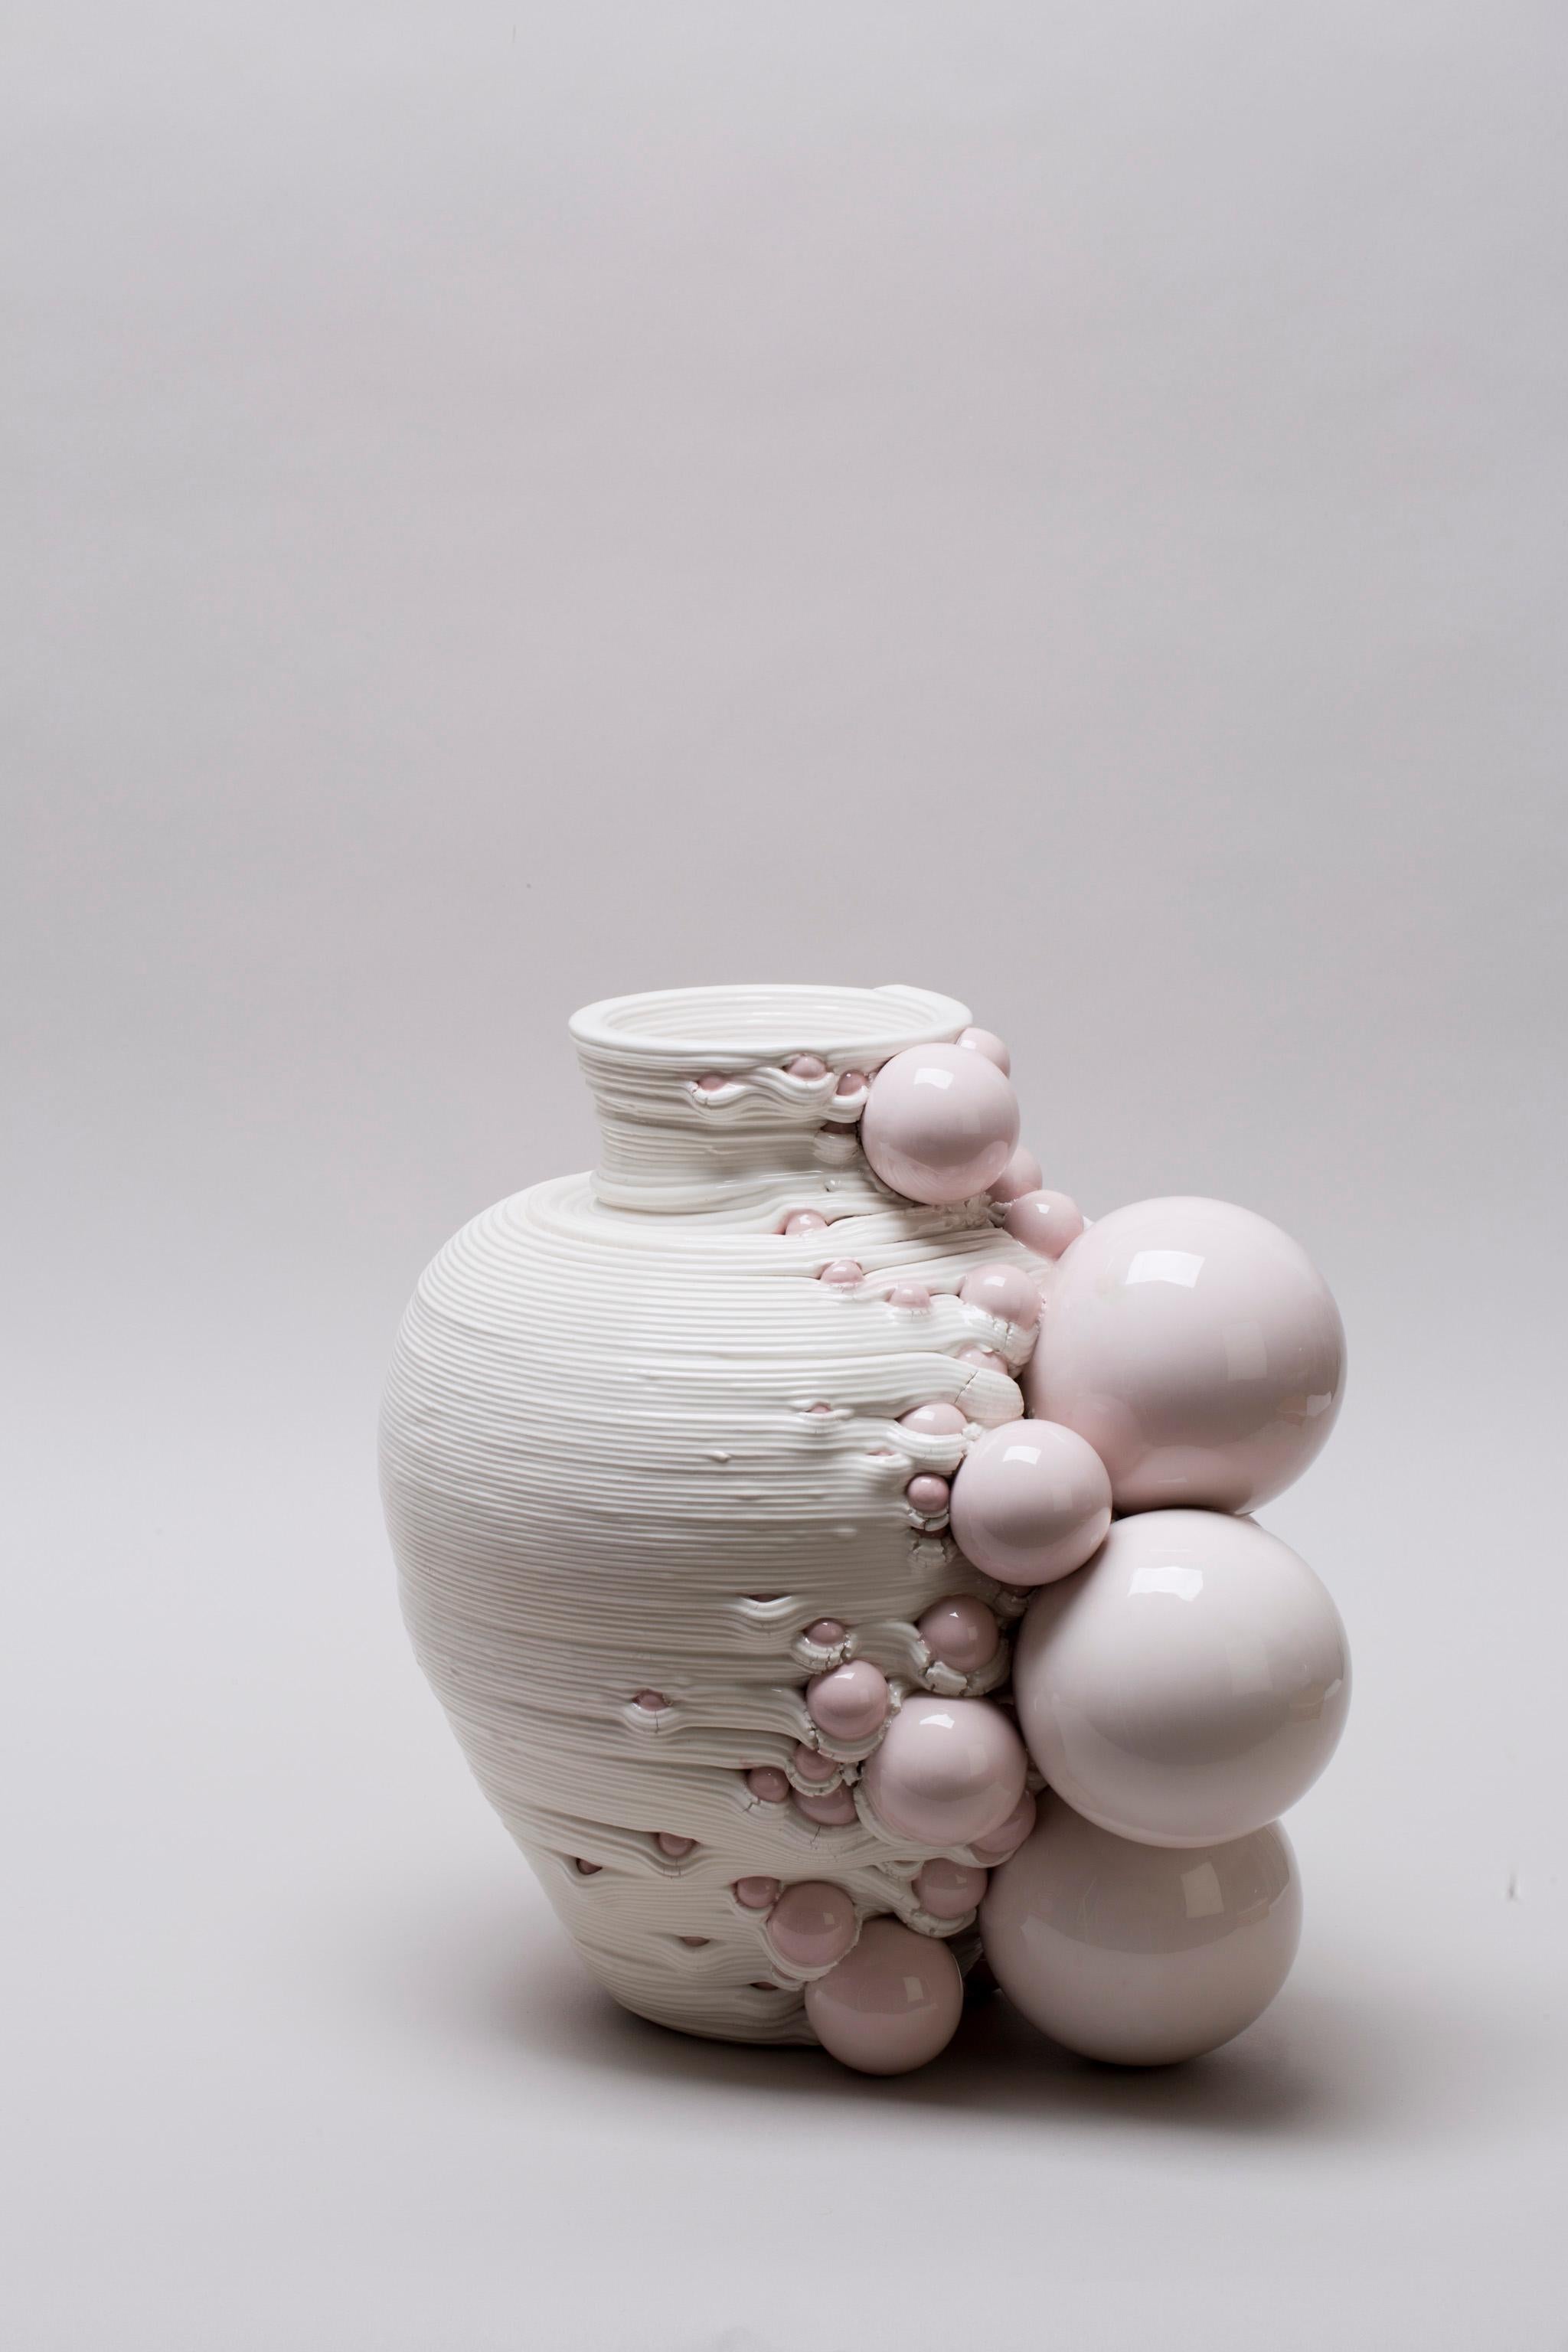 702043 Sculpture Decoration Object 28x21cm White-Silver from Glazed Earthenware 